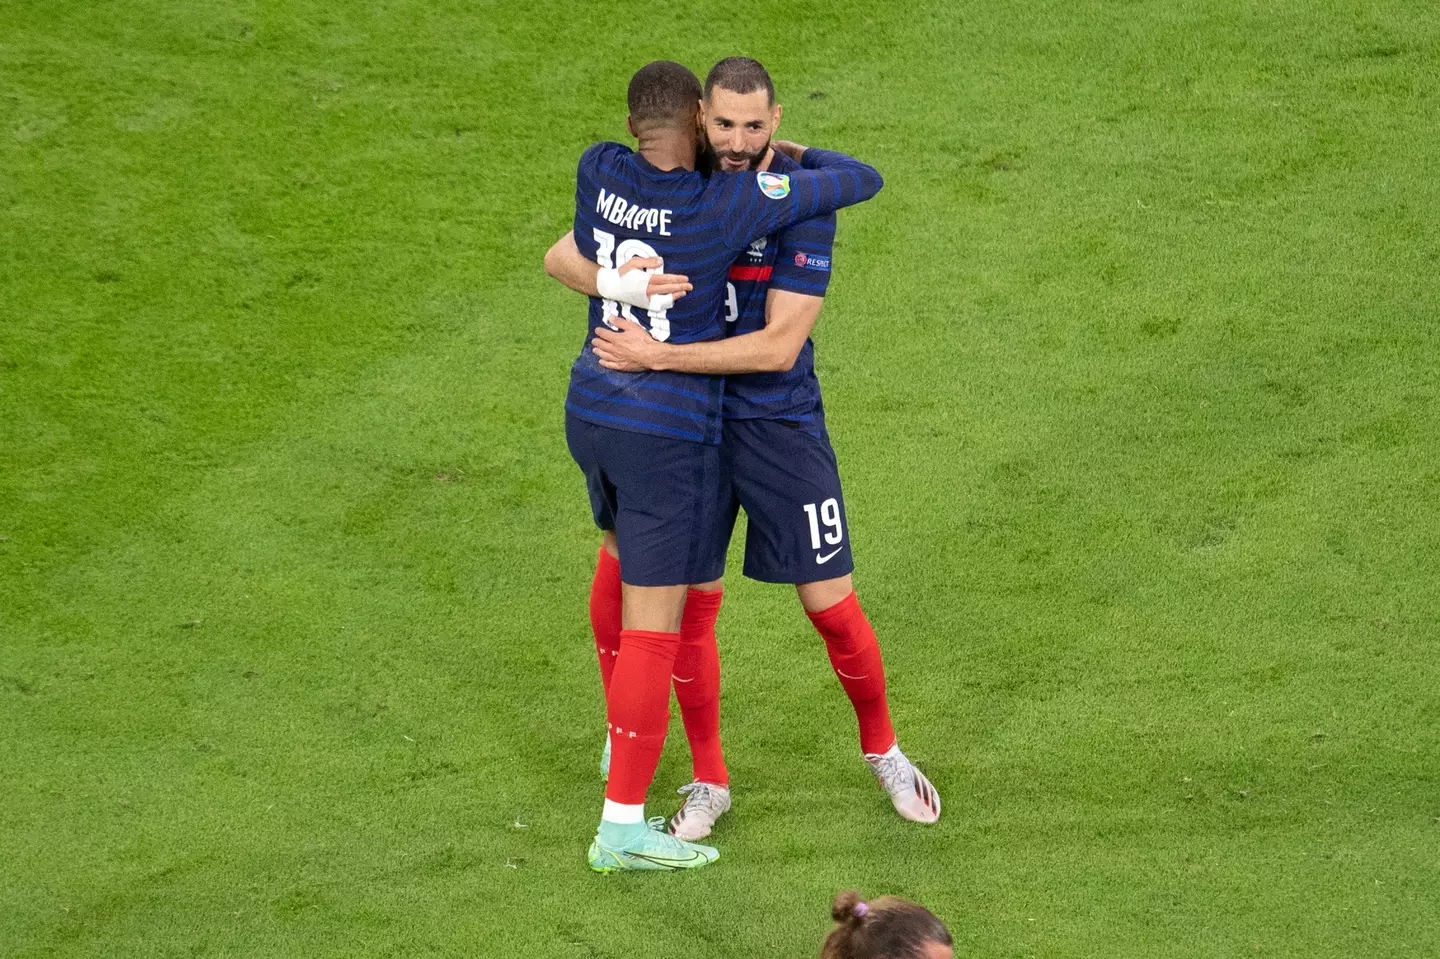 Mbappe and Benzema could soon be club and international teammates. Image: PA Images